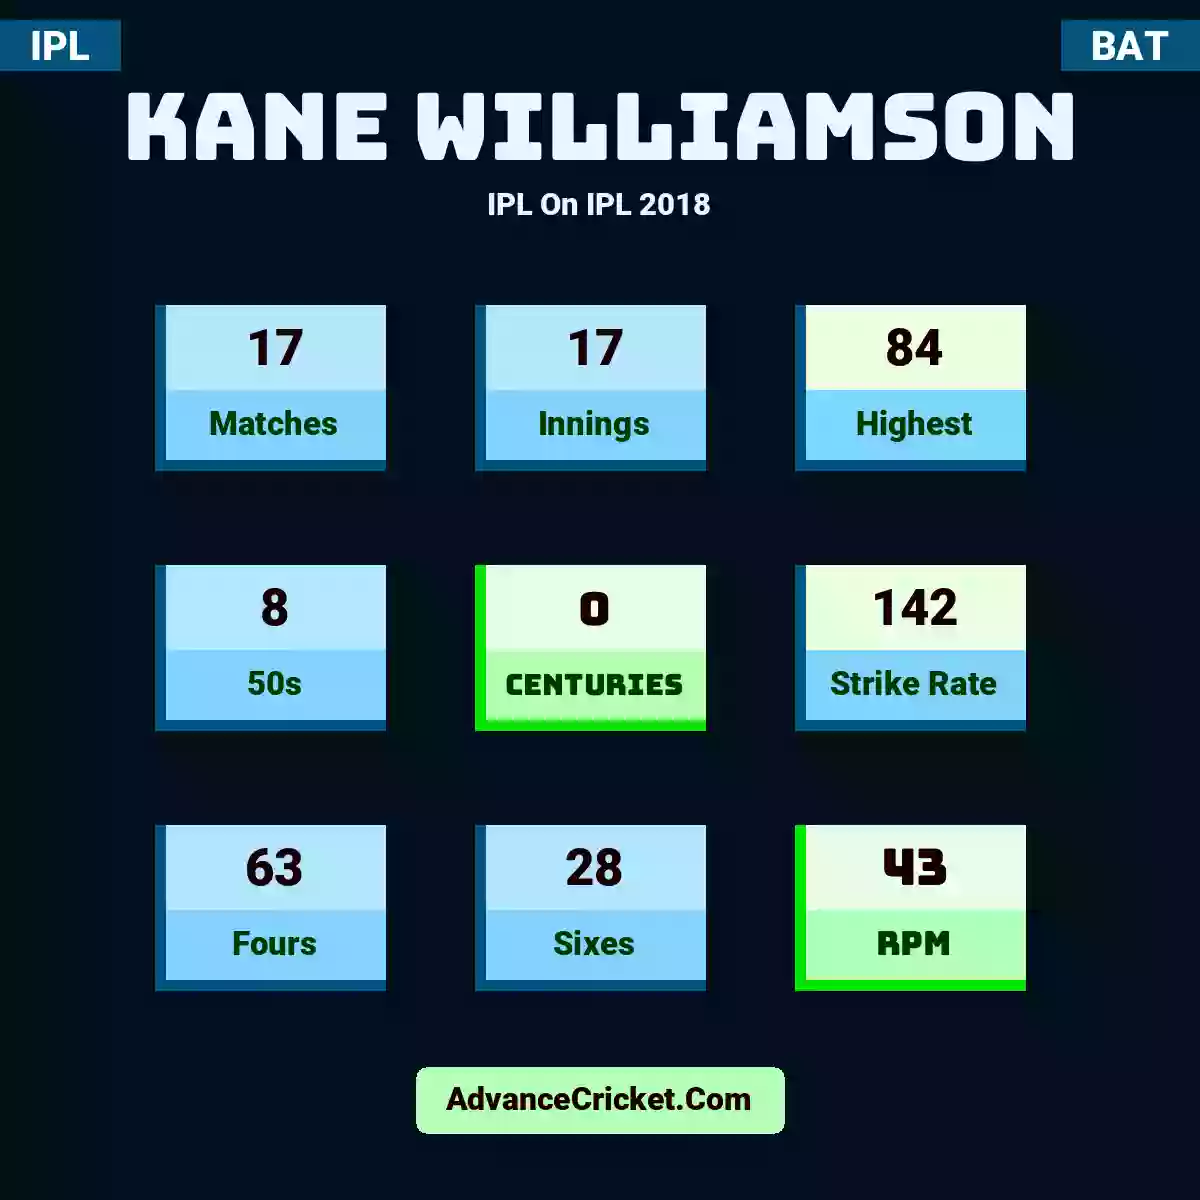 Kane Williamson IPL  On IPL 2018, Kane Williamson played 17 matches, scored 84 runs as highest, 8 half-centuries, and 0 centuries, with a strike rate of 142. K.Williamson hit 63 fours and 28 sixes, with an RPM of 43.